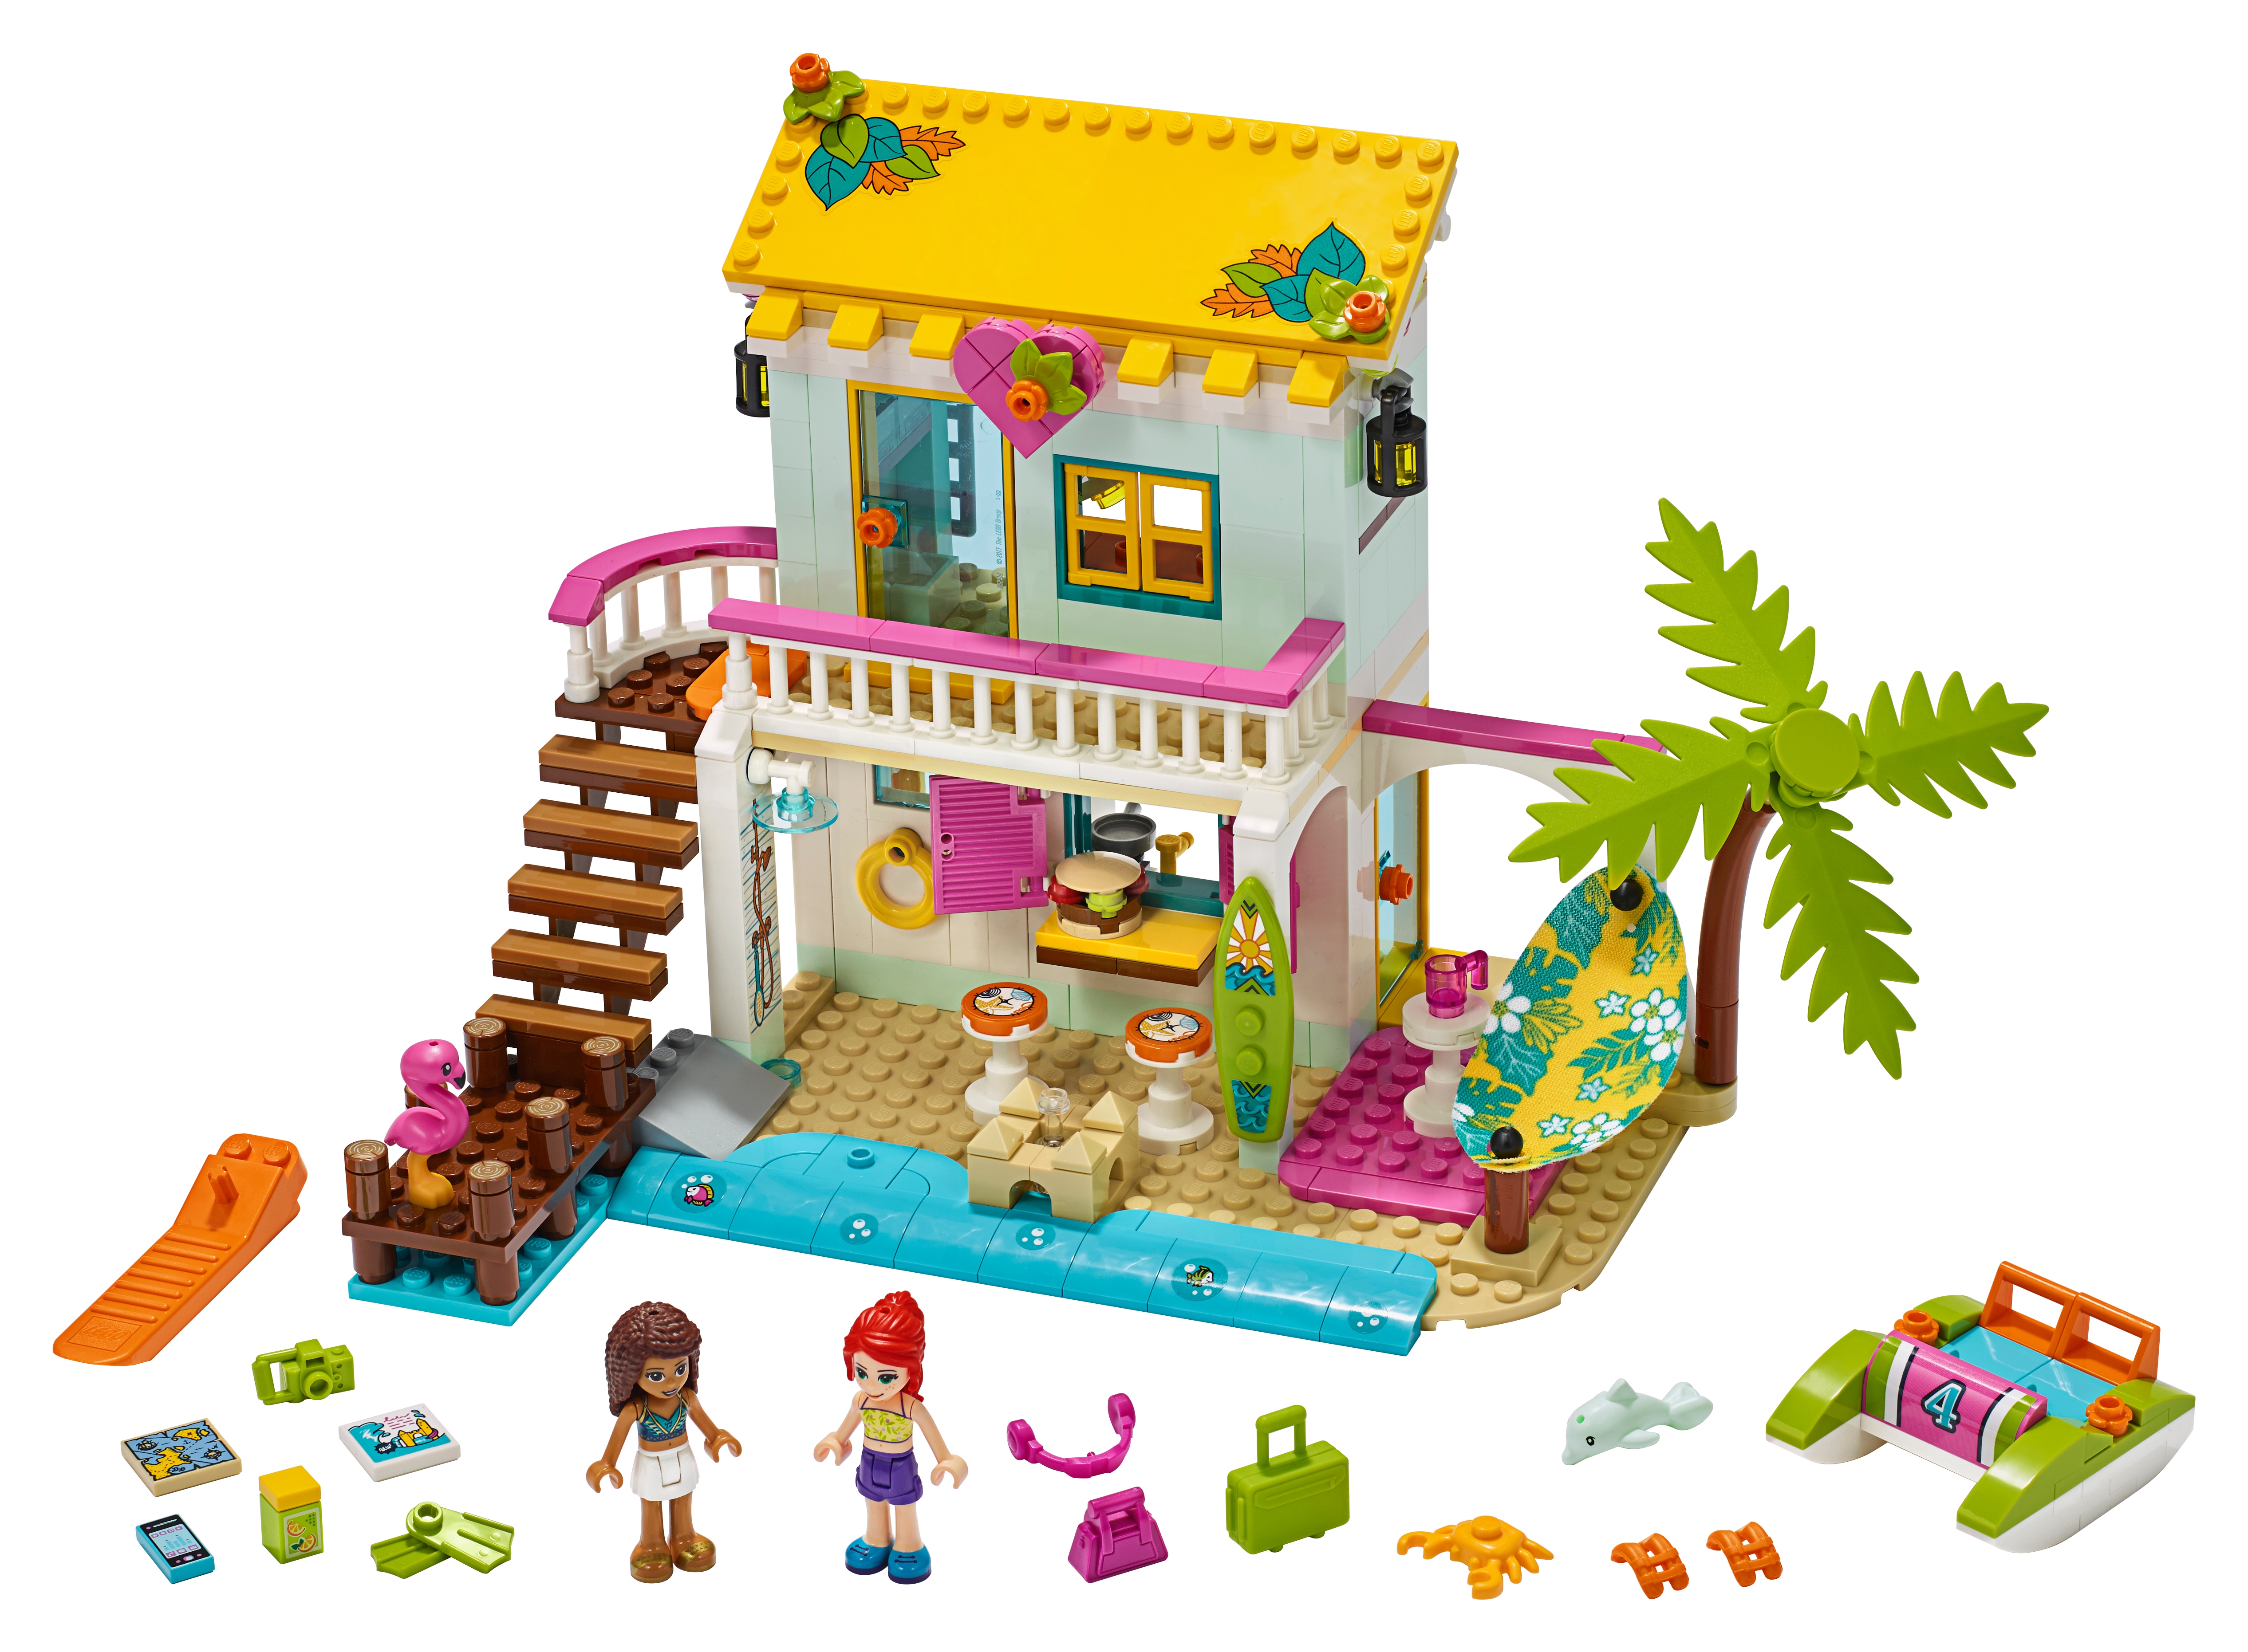 all lego friends sets